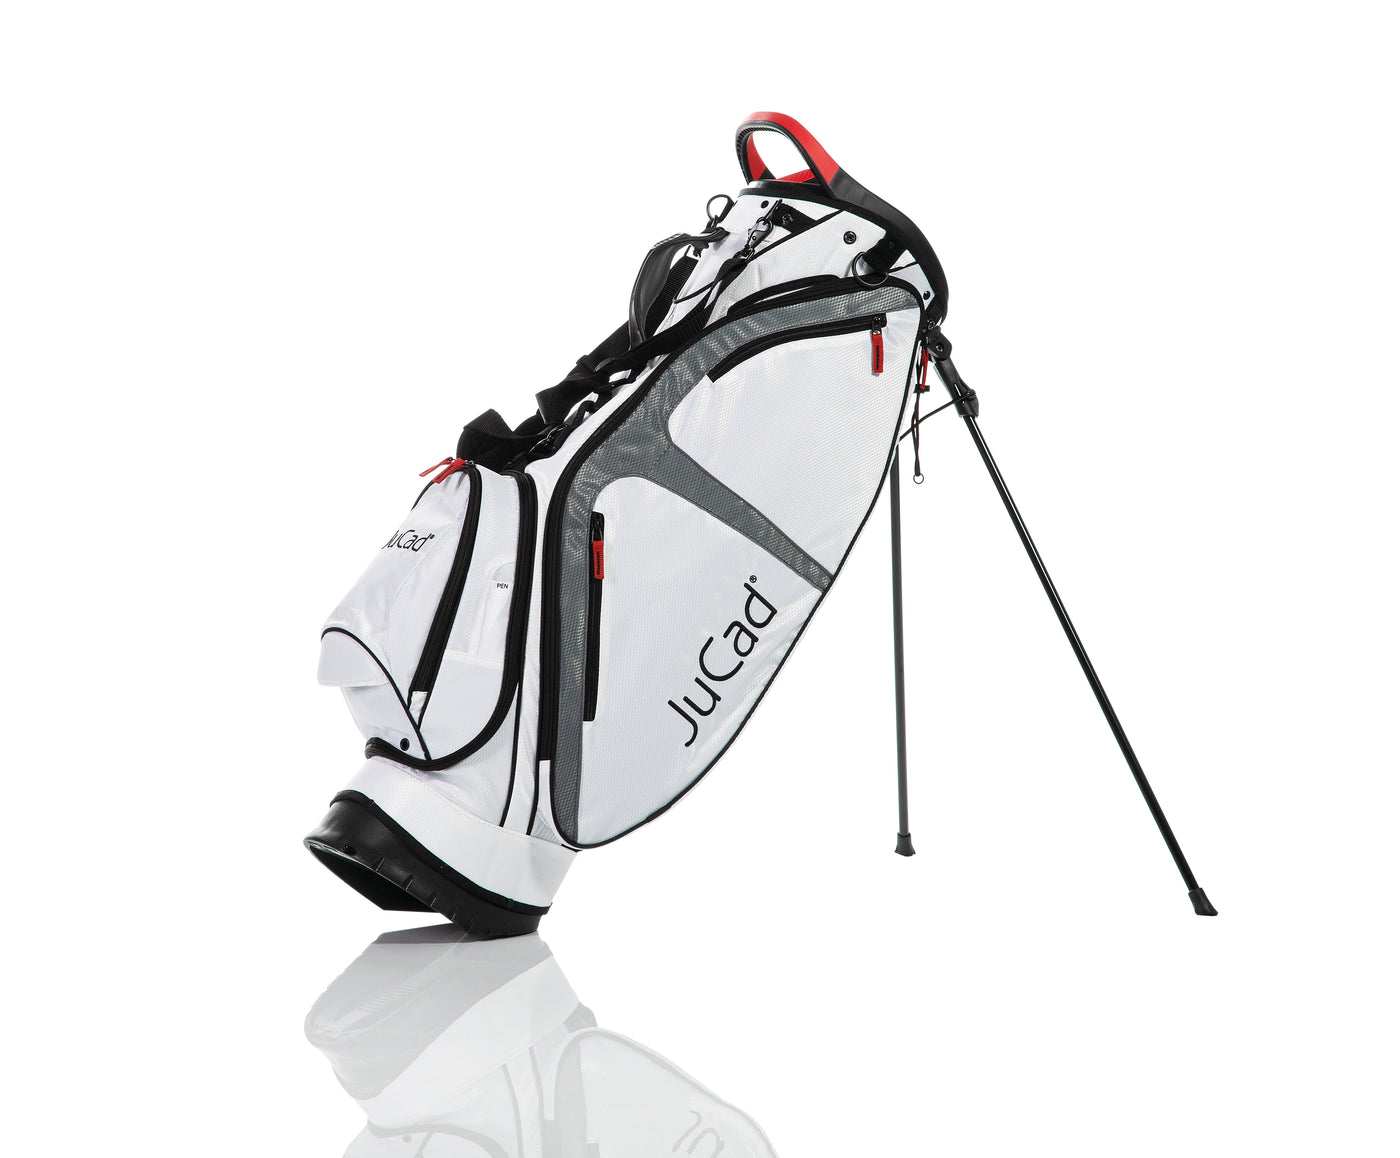 JuCad Fly golf bag - 2 in 1 - carry and drive